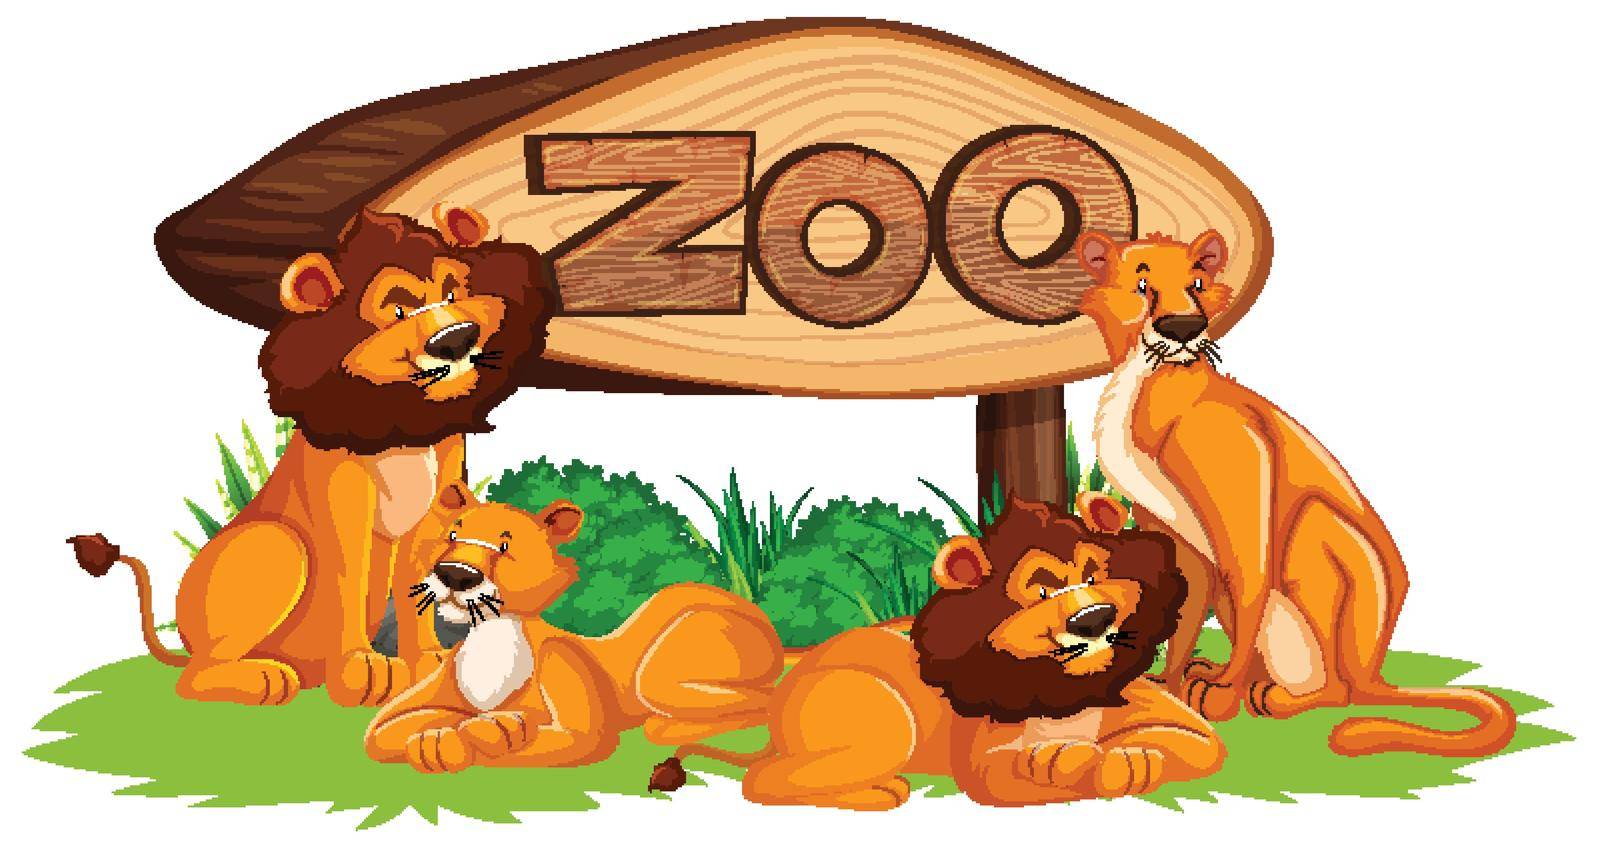 Lion with zoo sign isolated illustration